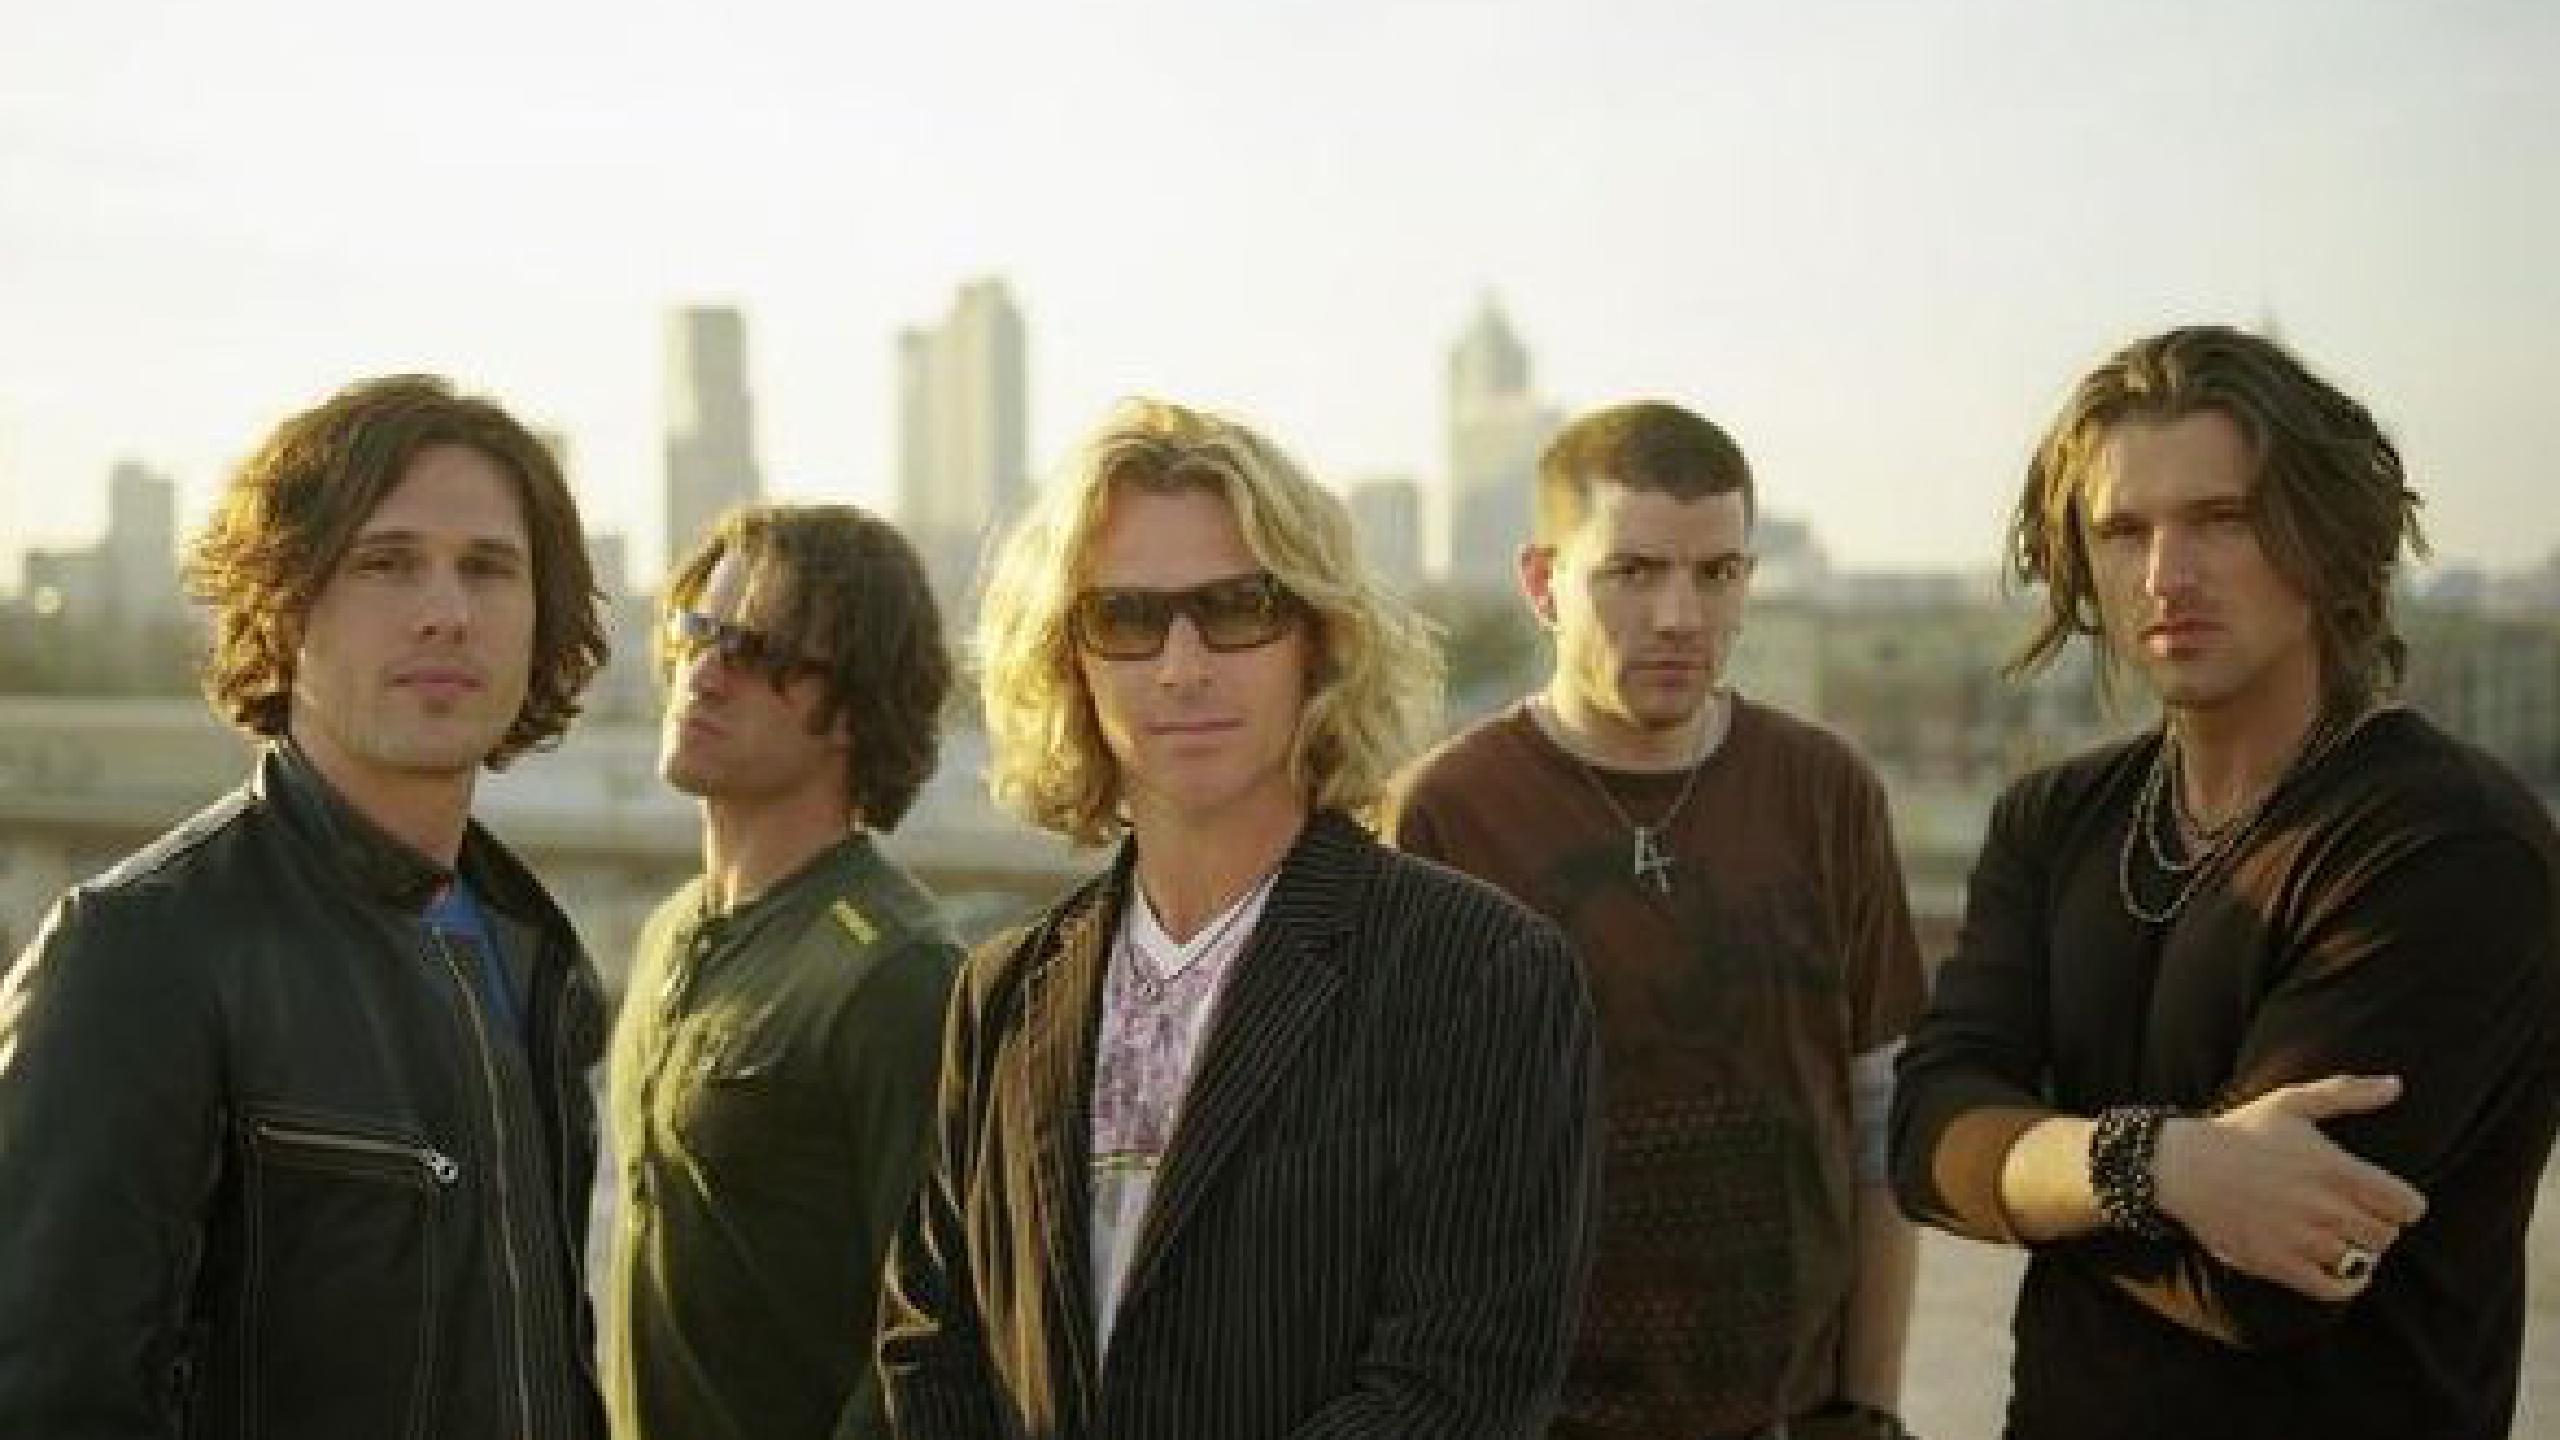 will collective soul tour in 2023